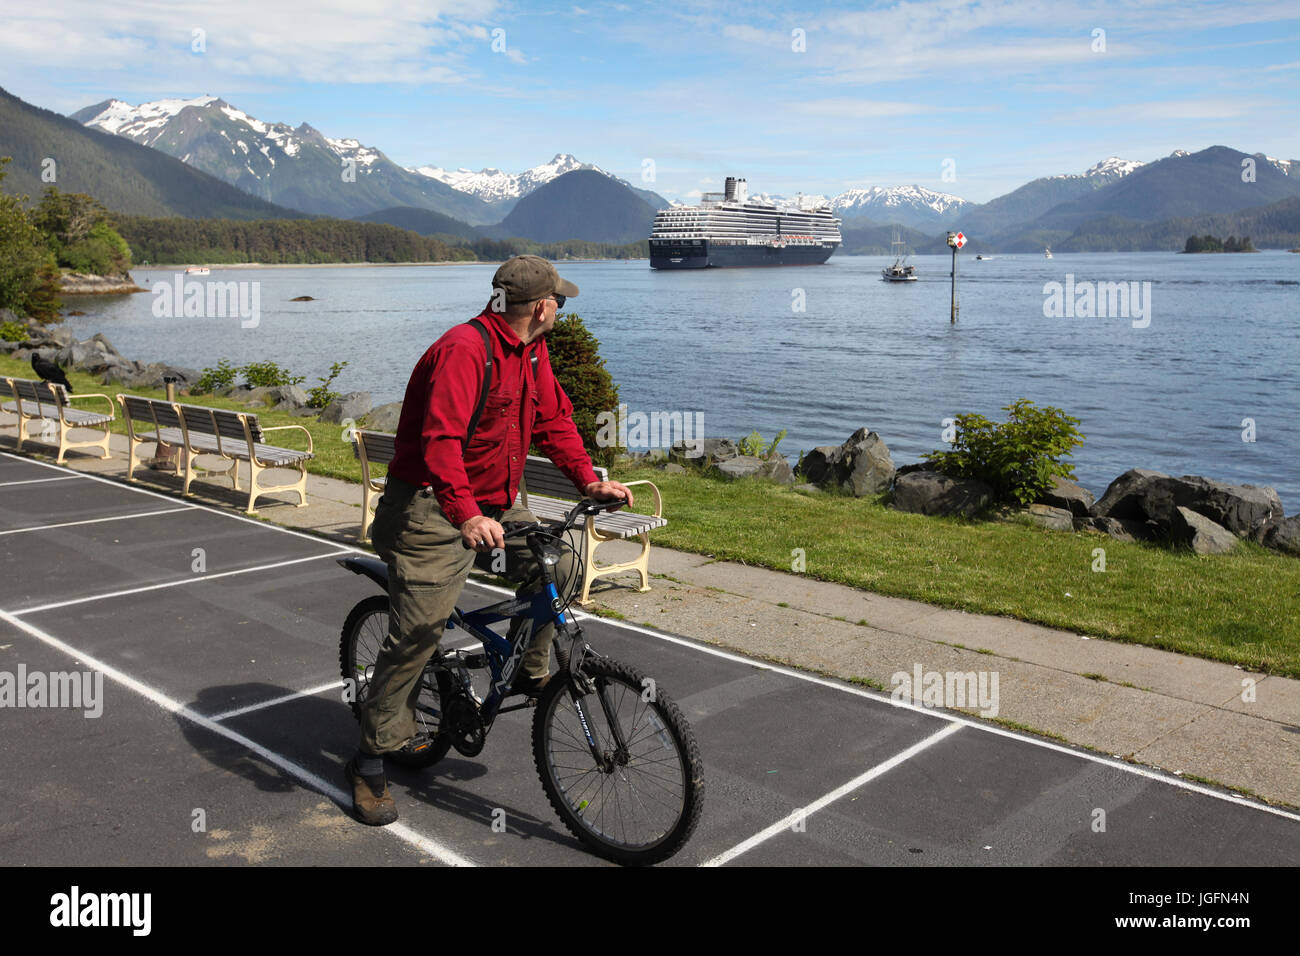 A man on a bicycle looks at a cruise ship anchored in Sitka's harbor in front of snow-covered mountains. Stock Photo